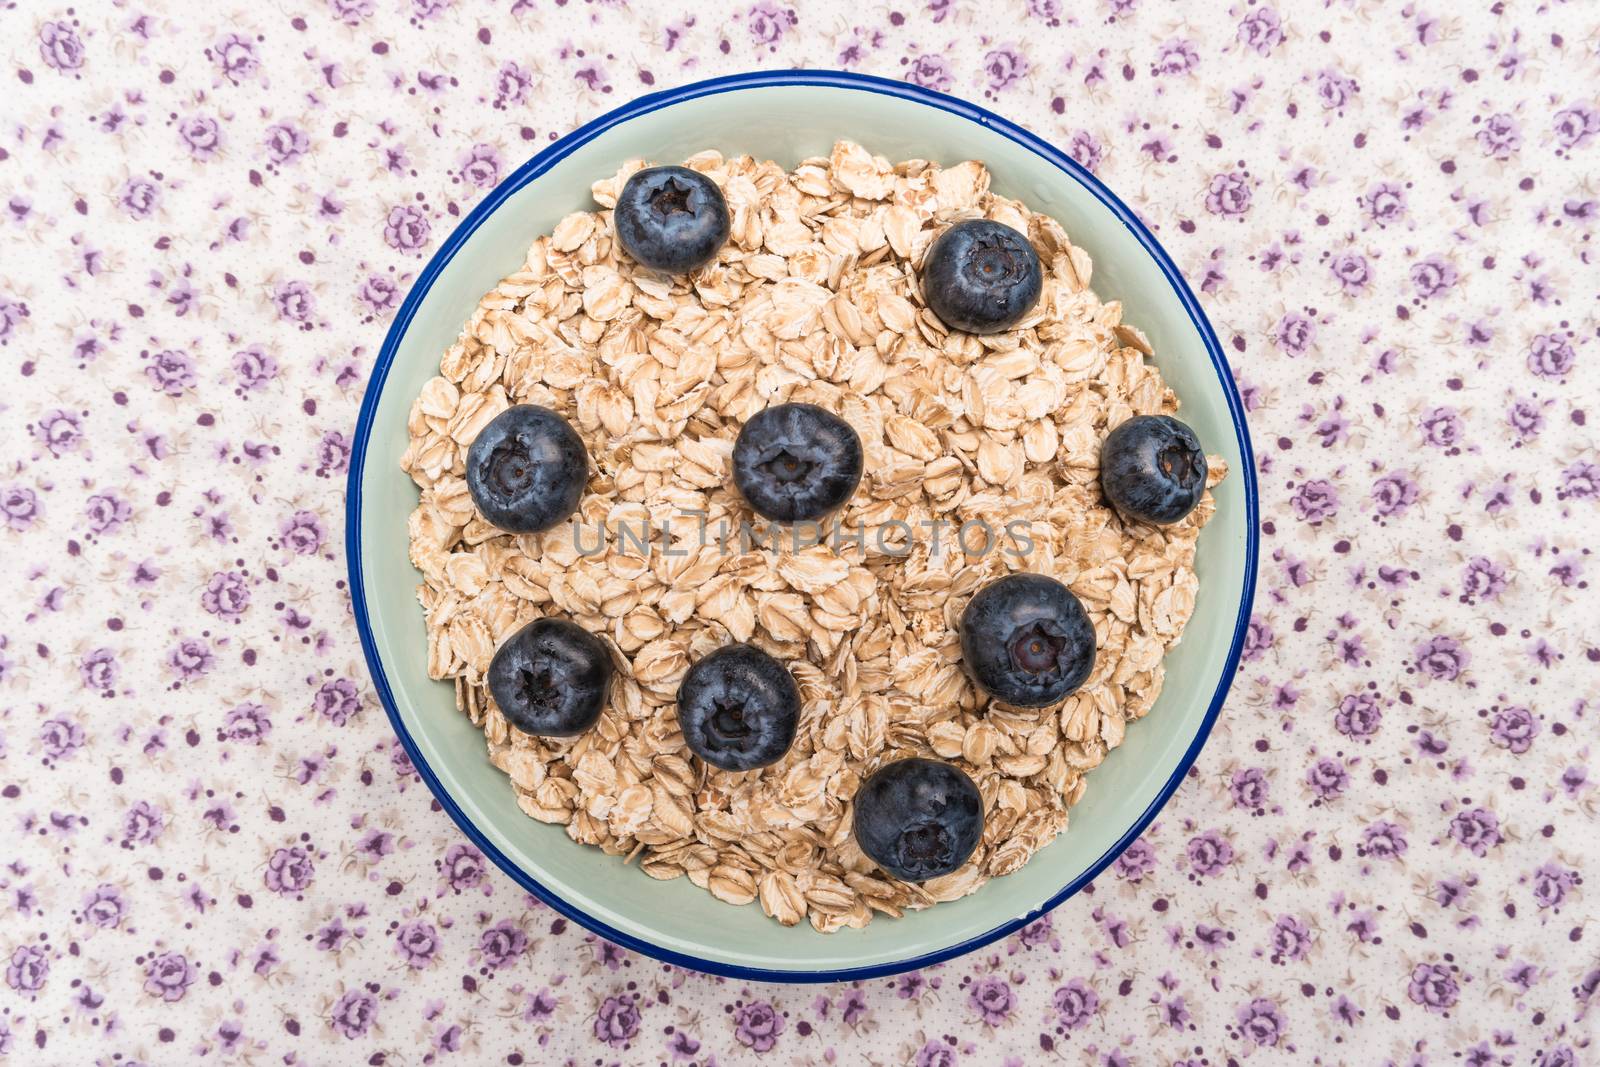 Oat flakes with blueberries by AnaMarques